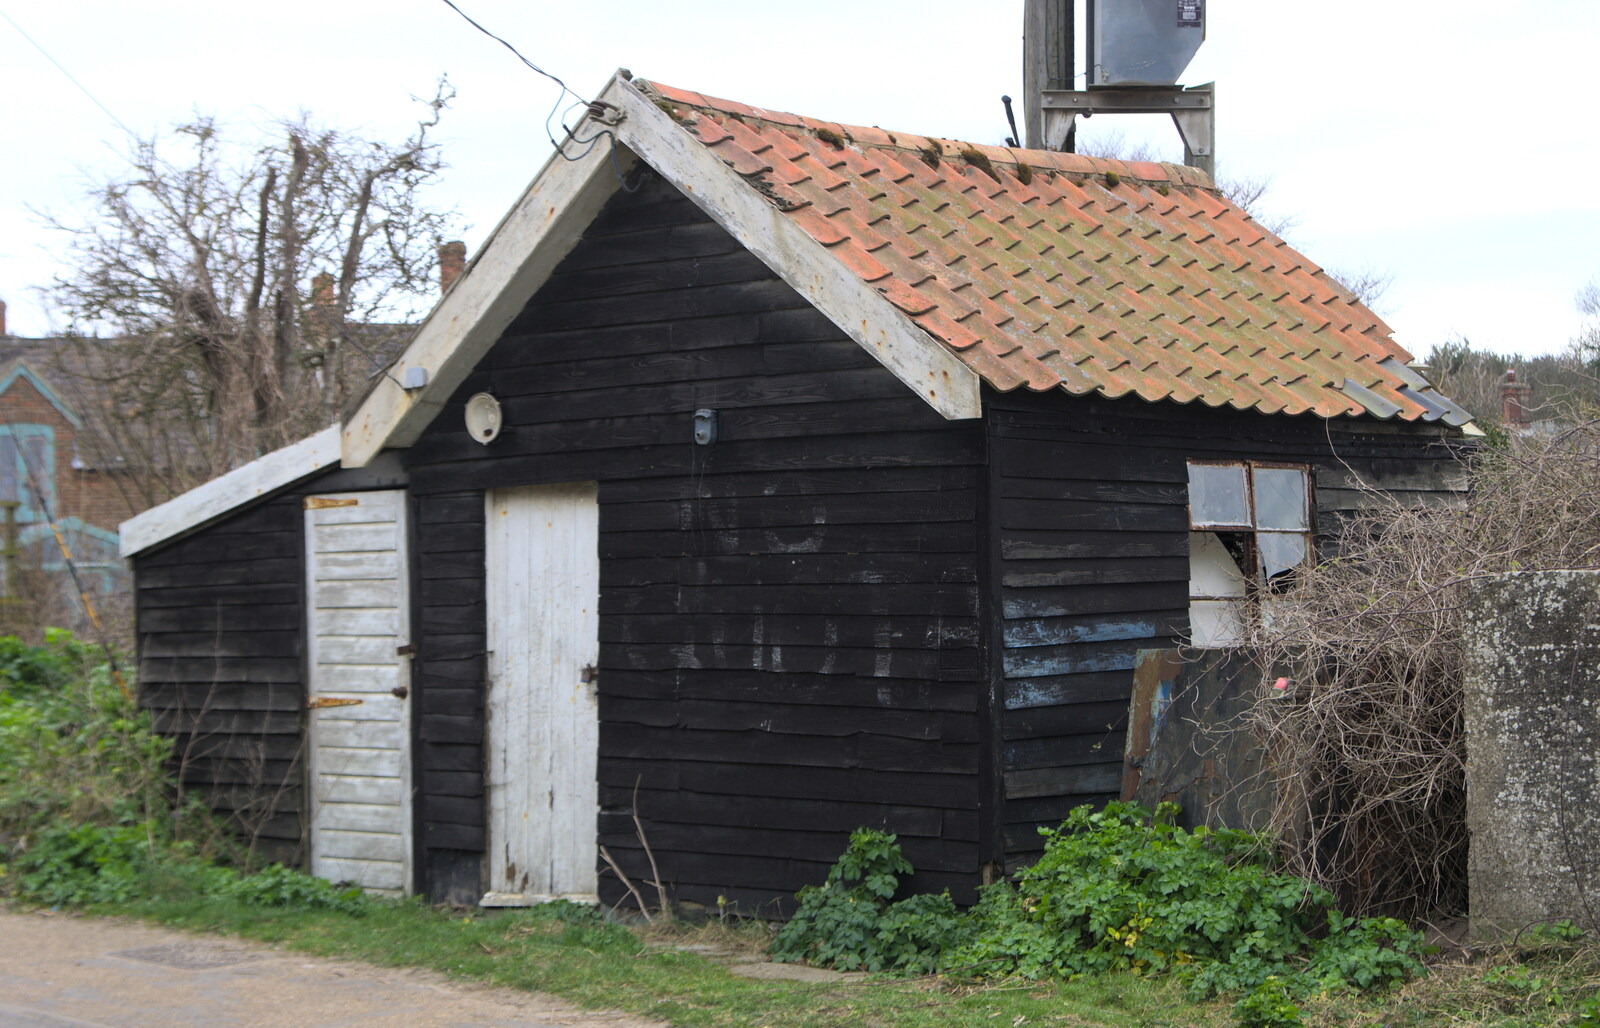 Tumble-down wooden shed from A Day on the Beach, Dunwich, Suffolk - 6th April 2015